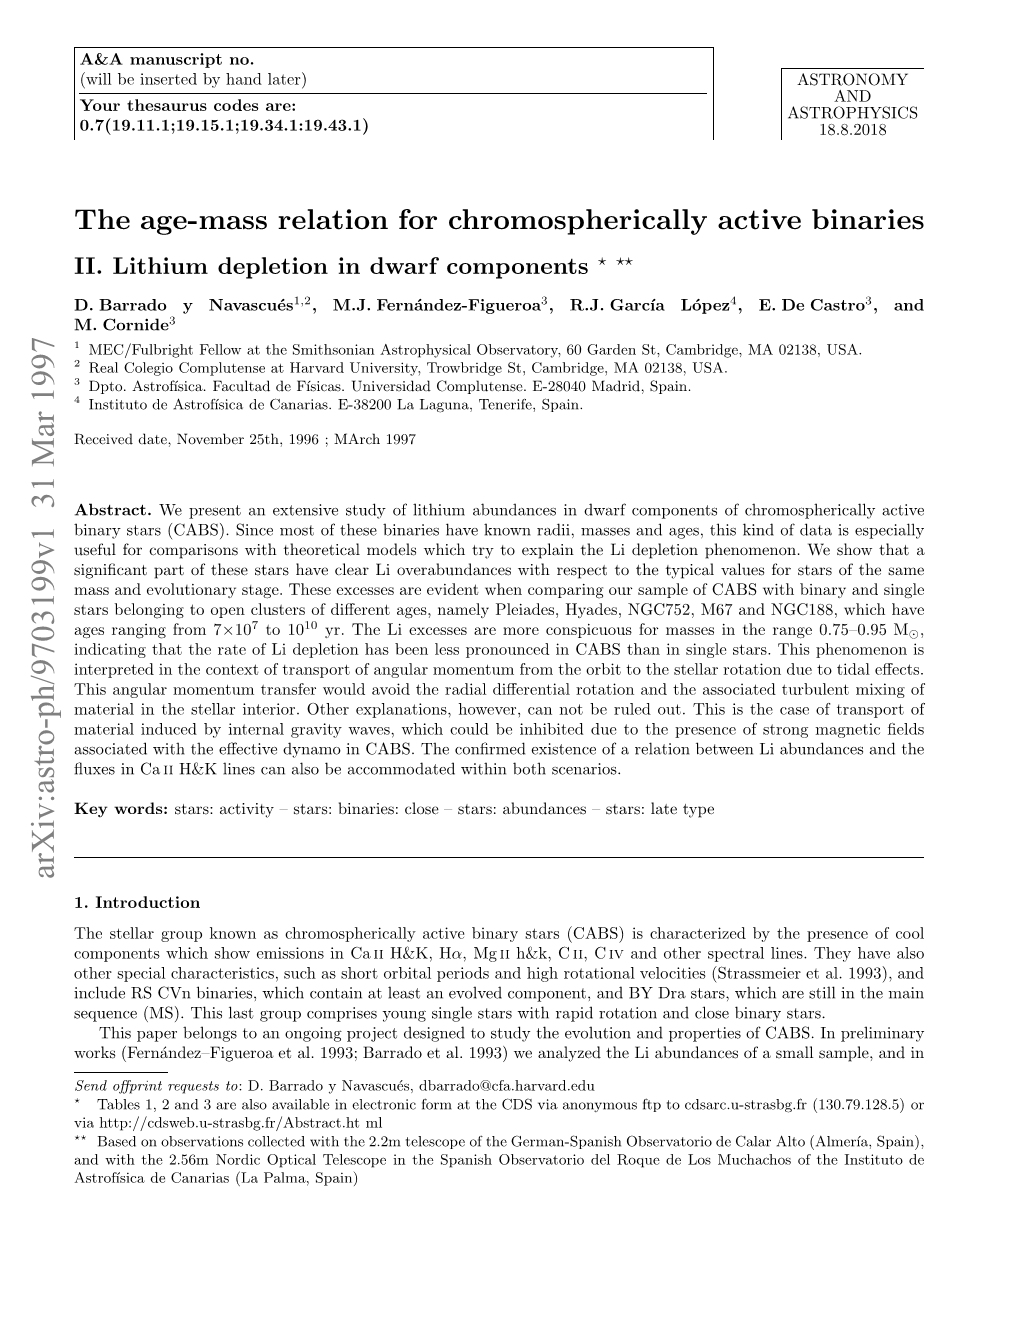 The Age-Mass Relation for Chromospherically Active Binaries